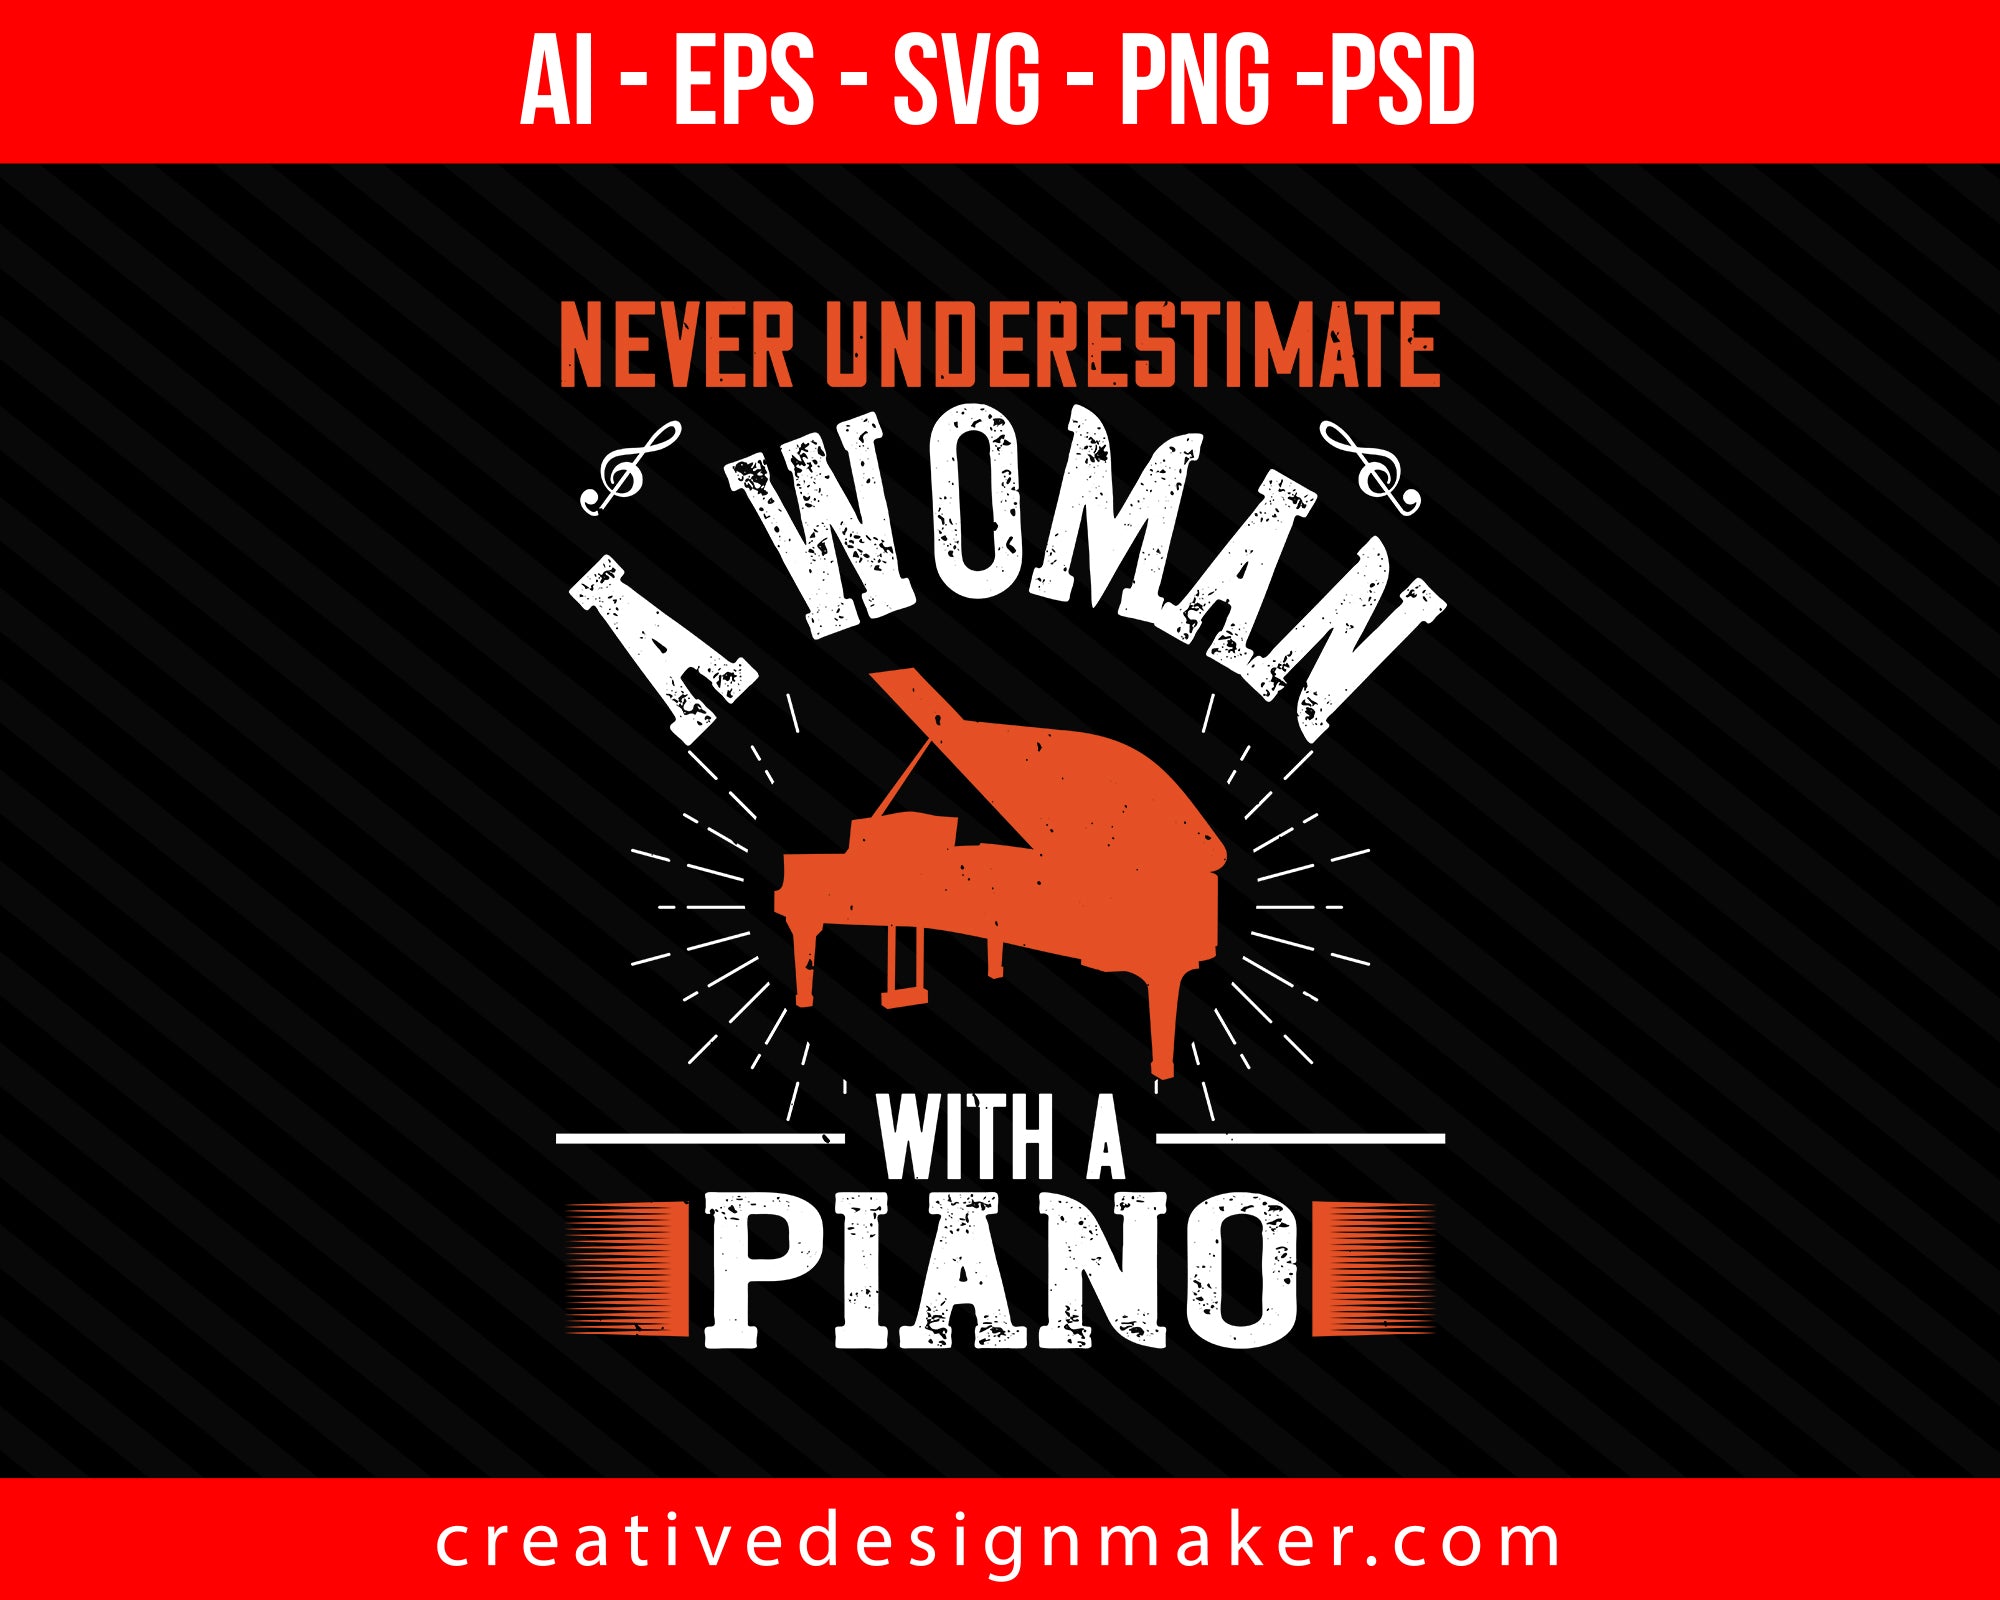 Never underestimate a woman with a piano Print Ready Editable T-Shirt SVG Design!